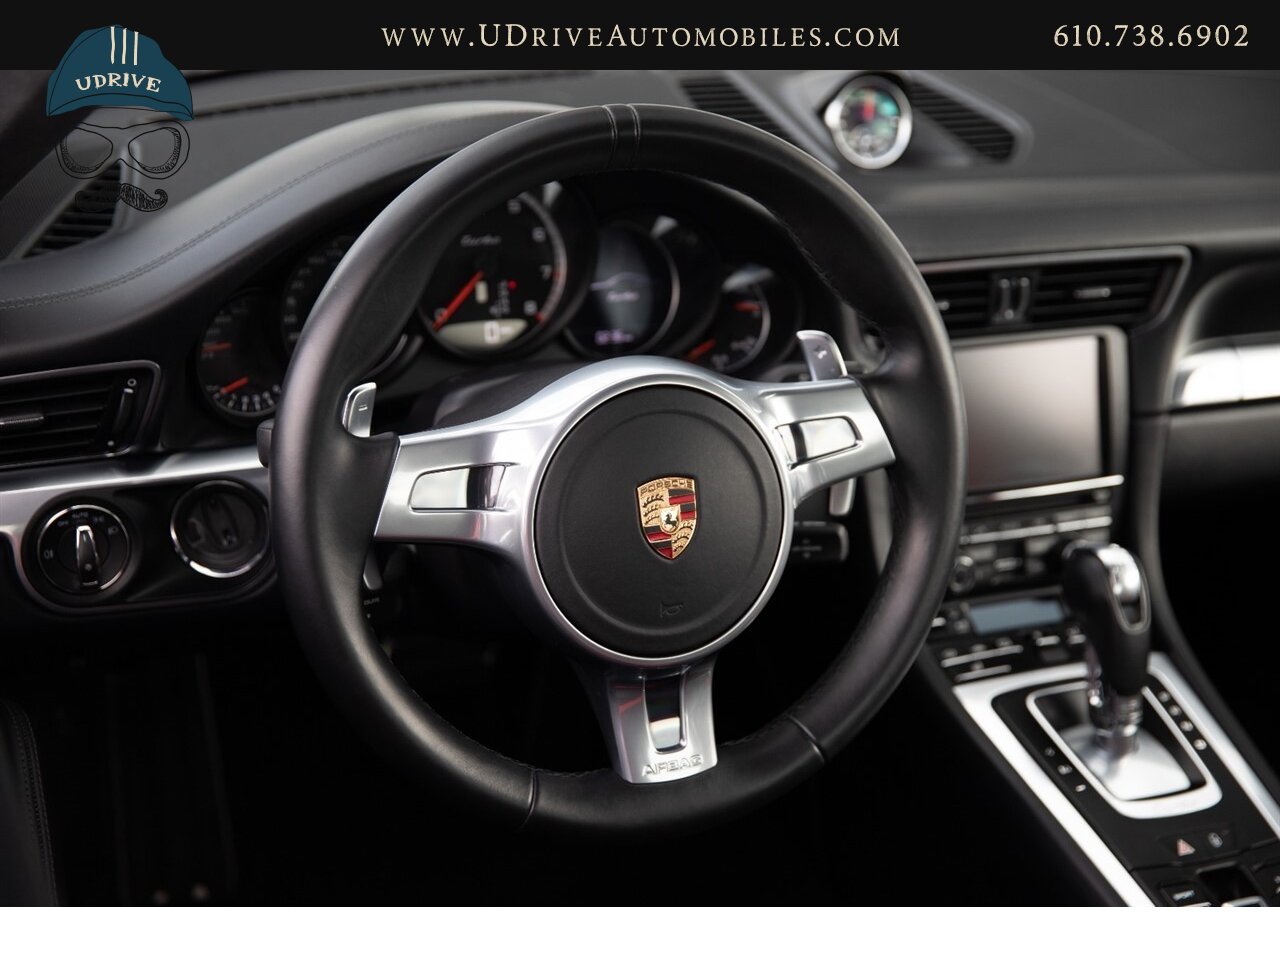 2014 Porsche 911 Turbo 12k Miles White over Black Chrono Rear Wiper  Sport Seats 20in Turbo Whls Sunroof Red Belts - Photo 27 - West Chester, PA 19382